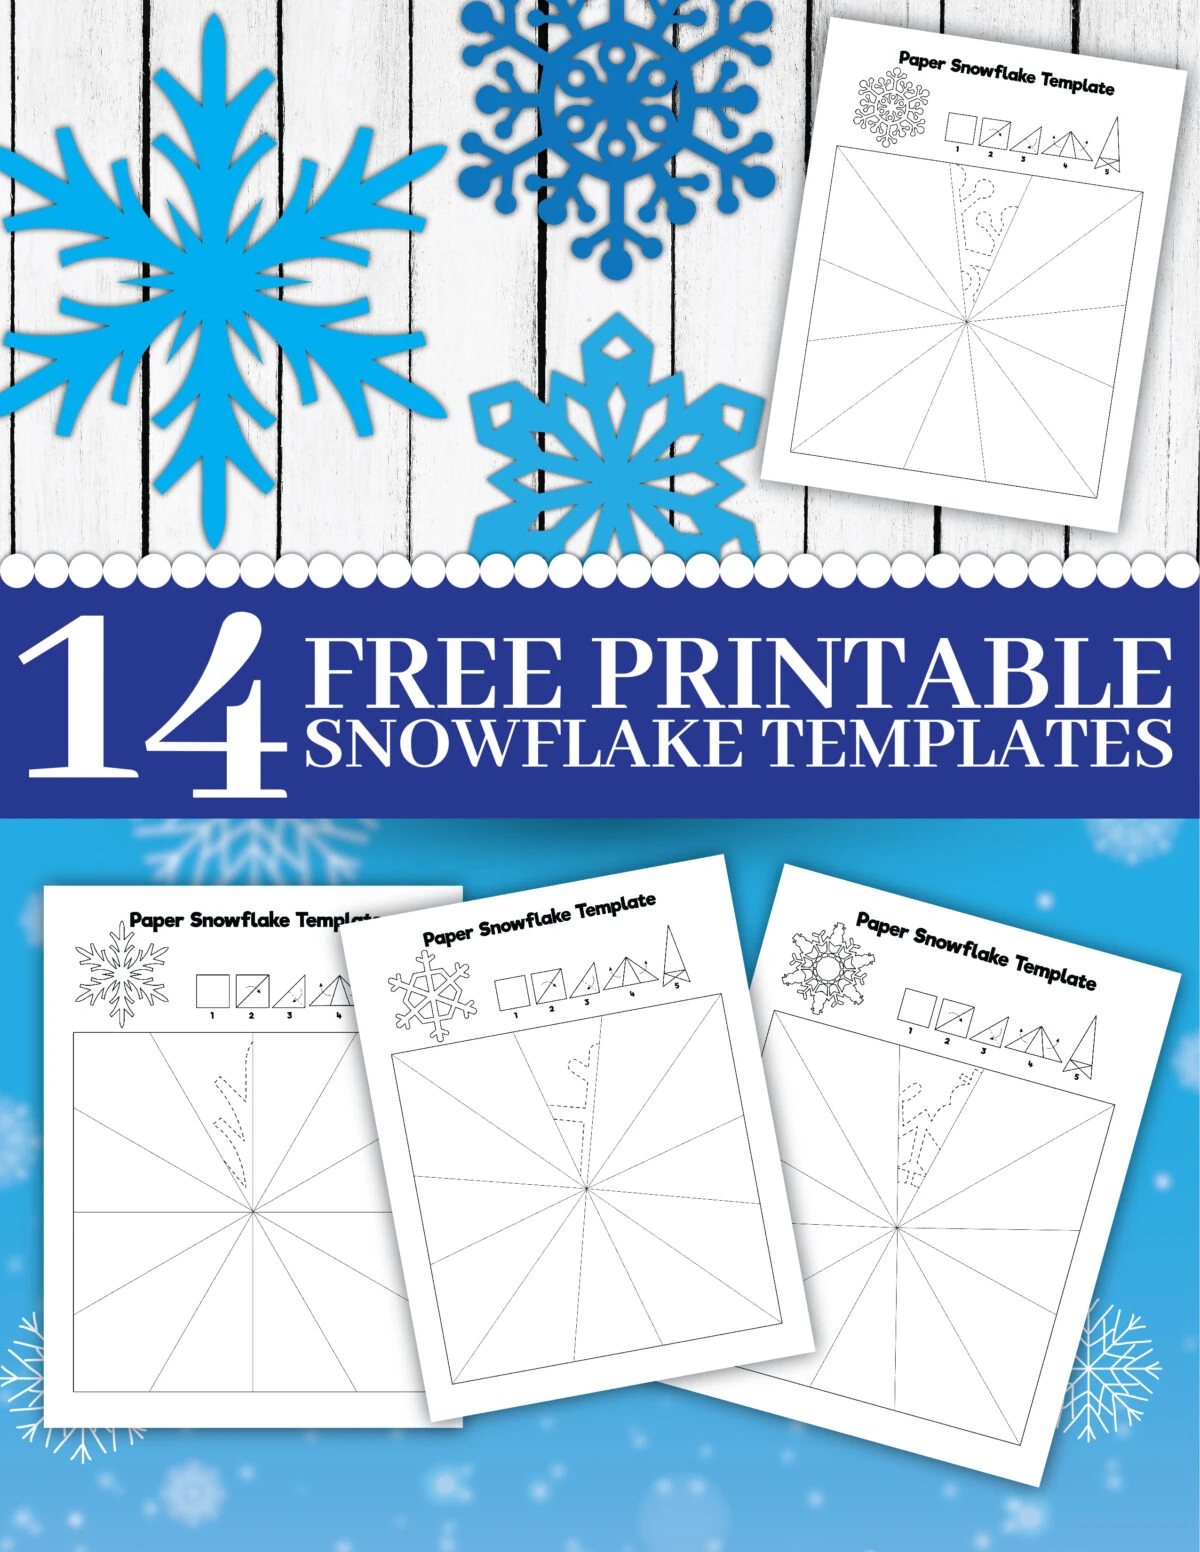 Looking for some free printable paper snowflake templates? I've got you covered. Here are fourteen different designs to choose from!